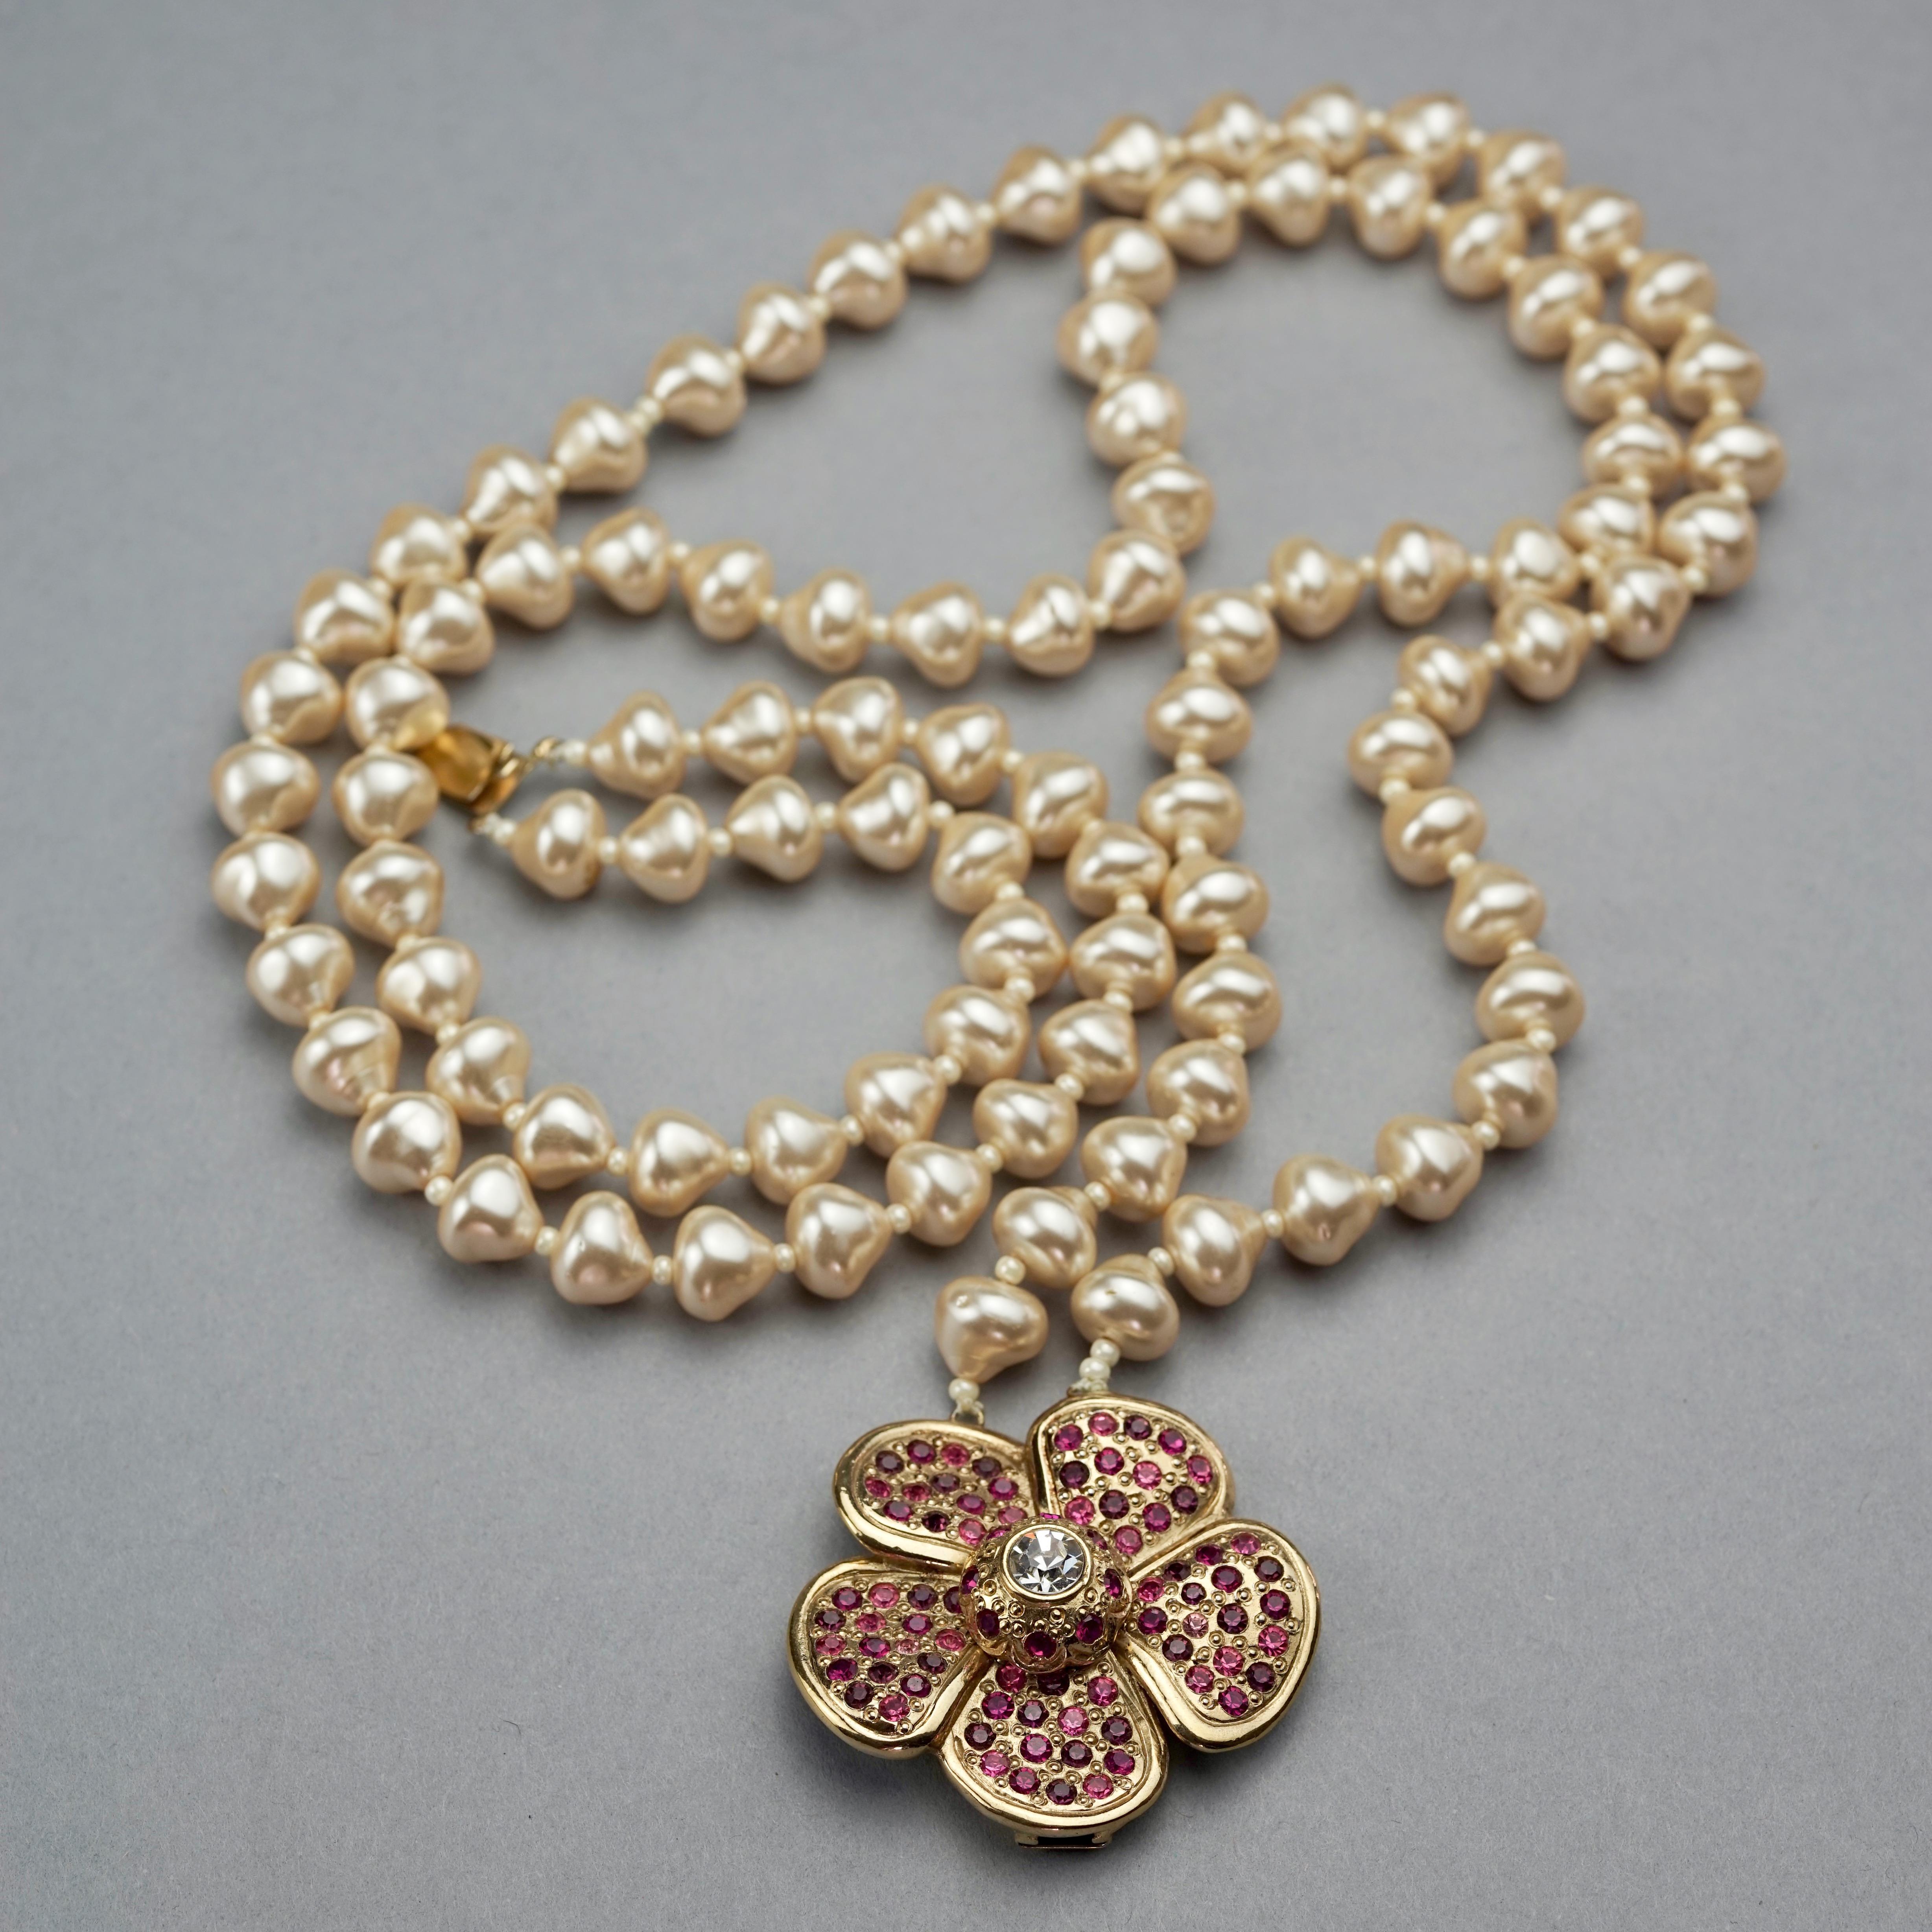 Vintage YVES SAINT LAURENT Ysl Flower Rhinestone Double Strand Pearl Necklace In Excellent Condition For Sale In Kingersheim, Alsace